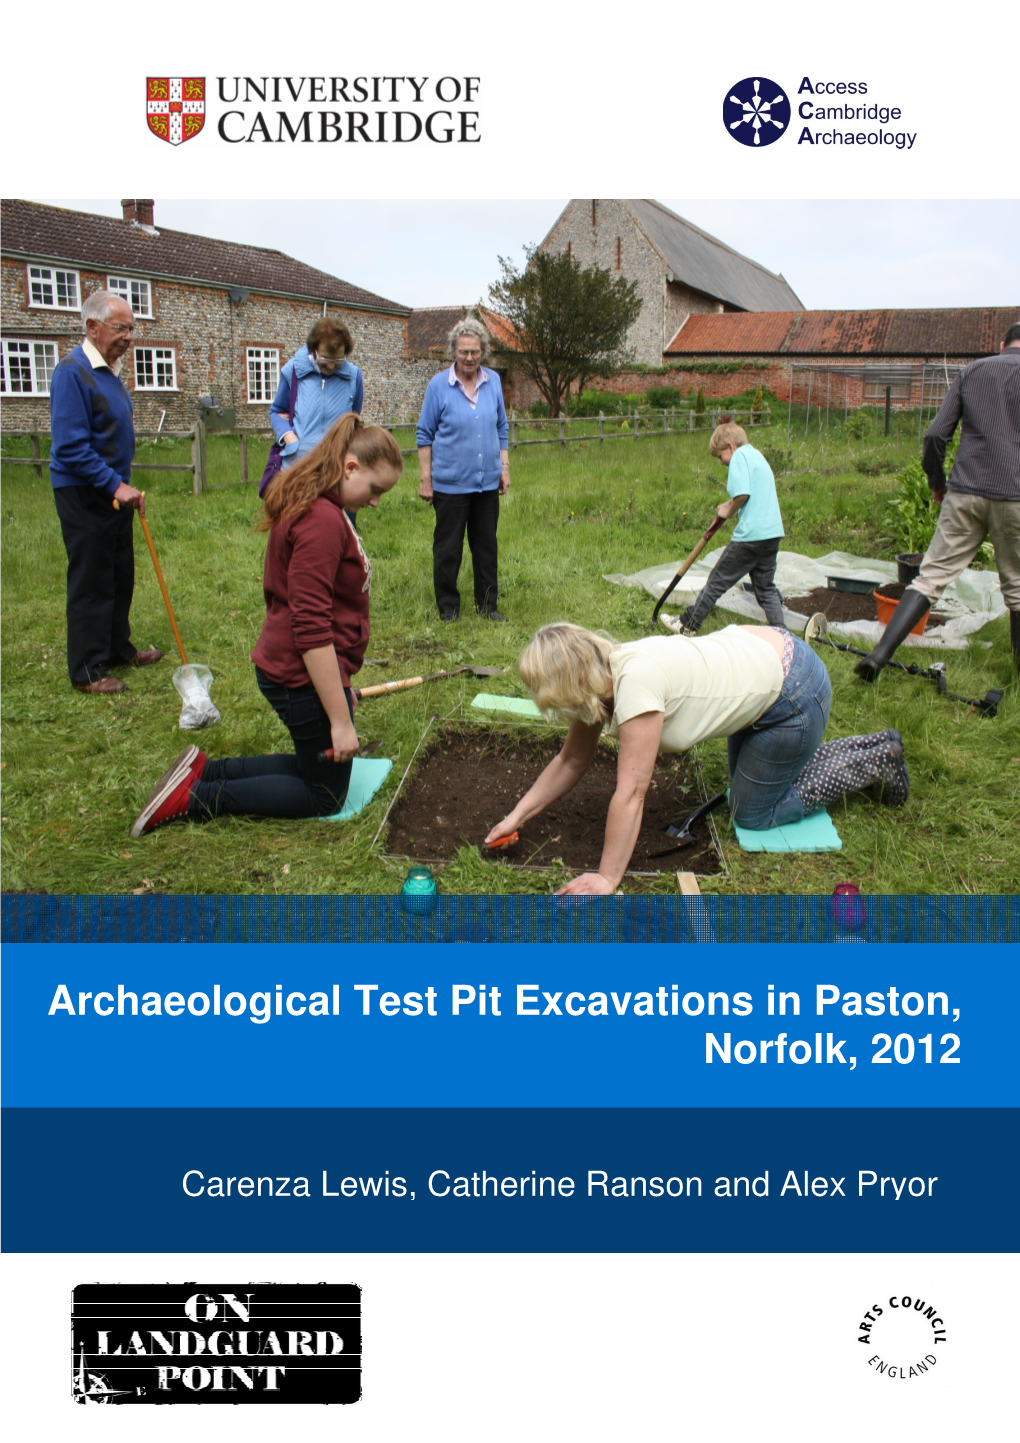 Archaeological Test Pit Excavations in Paston, Norfolk, 2012